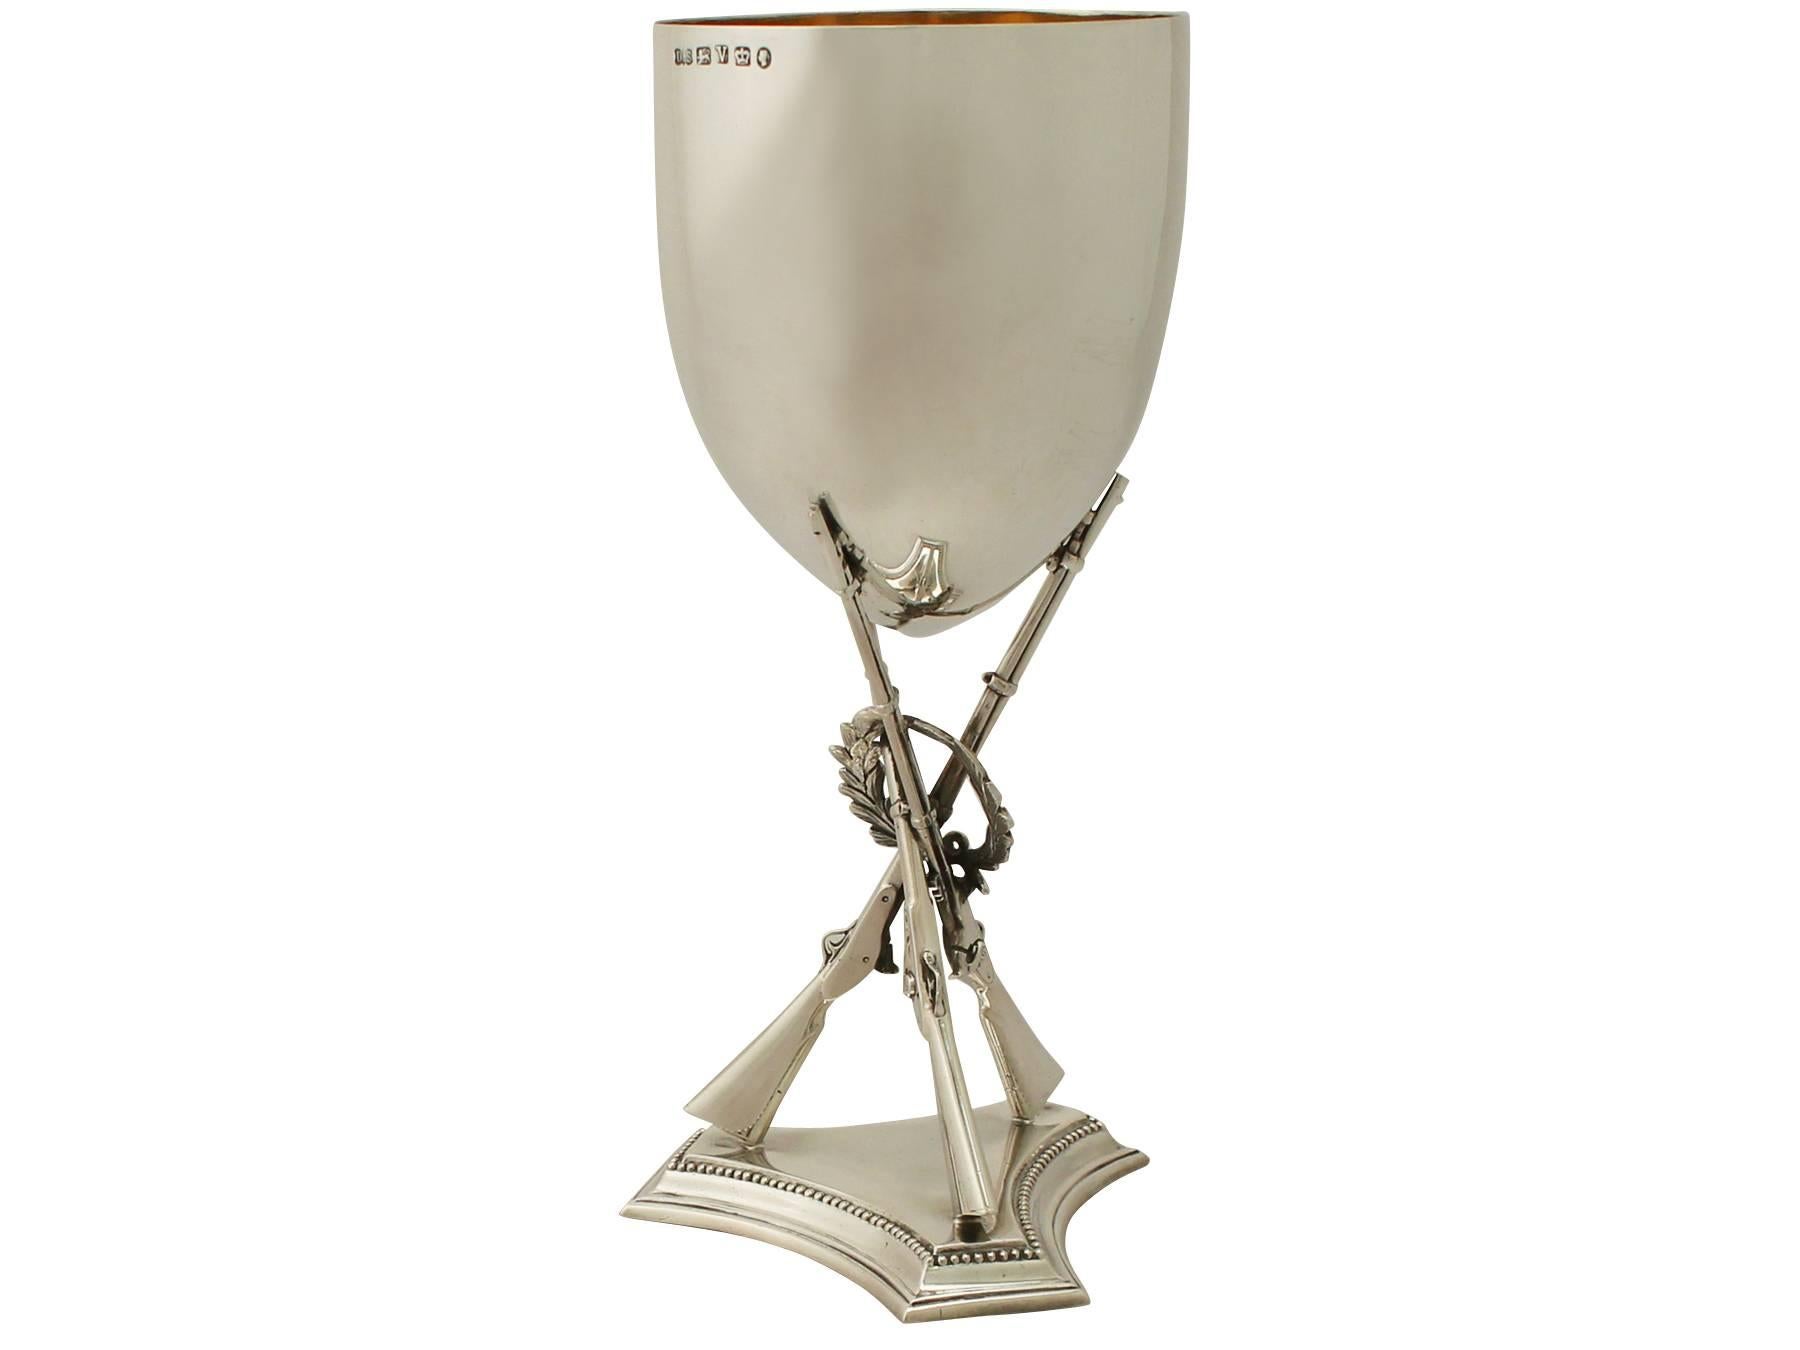 An exceptional, fine and impressive antique Victorian English sterling silver goblet with shooting/rifle interest; an addition to our diverse presentation silverware collection.

This exceptional antique Victorian sterling silver goblet has a